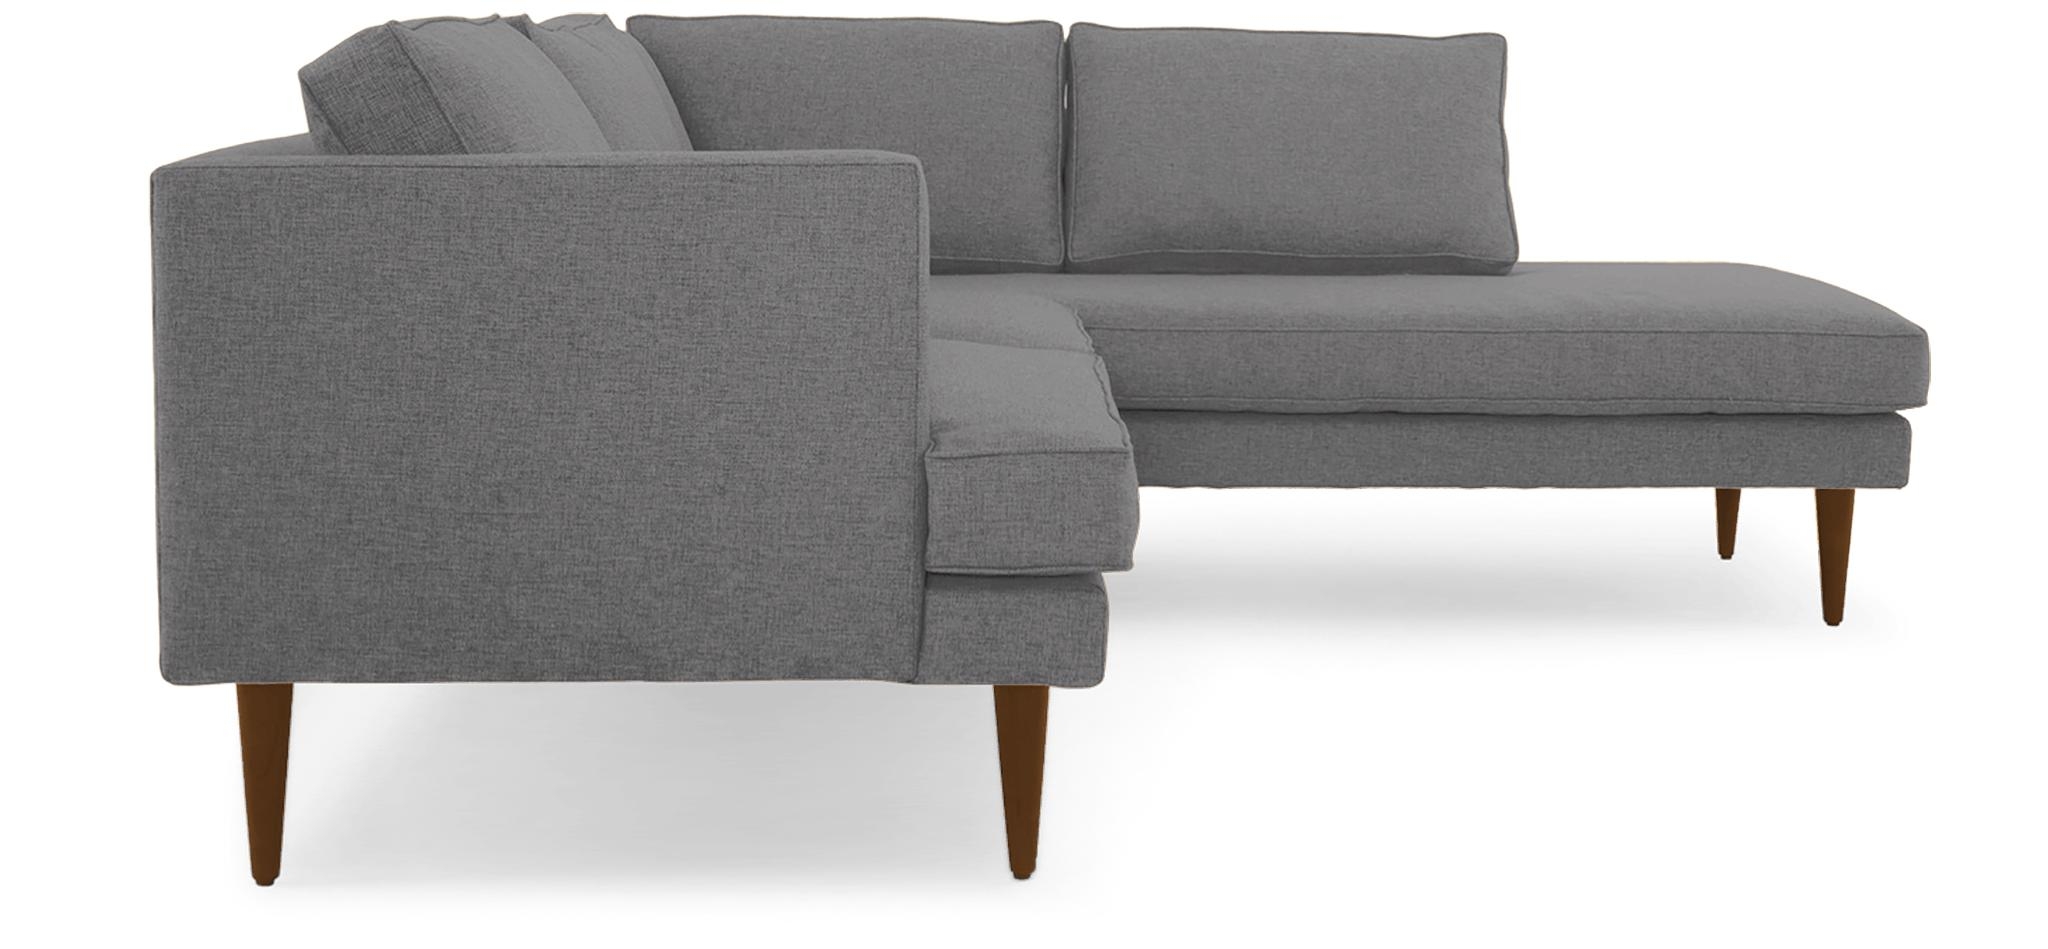 Gray Preston Mid Century Modern Sectional with Bumper (2 piece) - Royale Ash - Mocha - Right  - Image 2